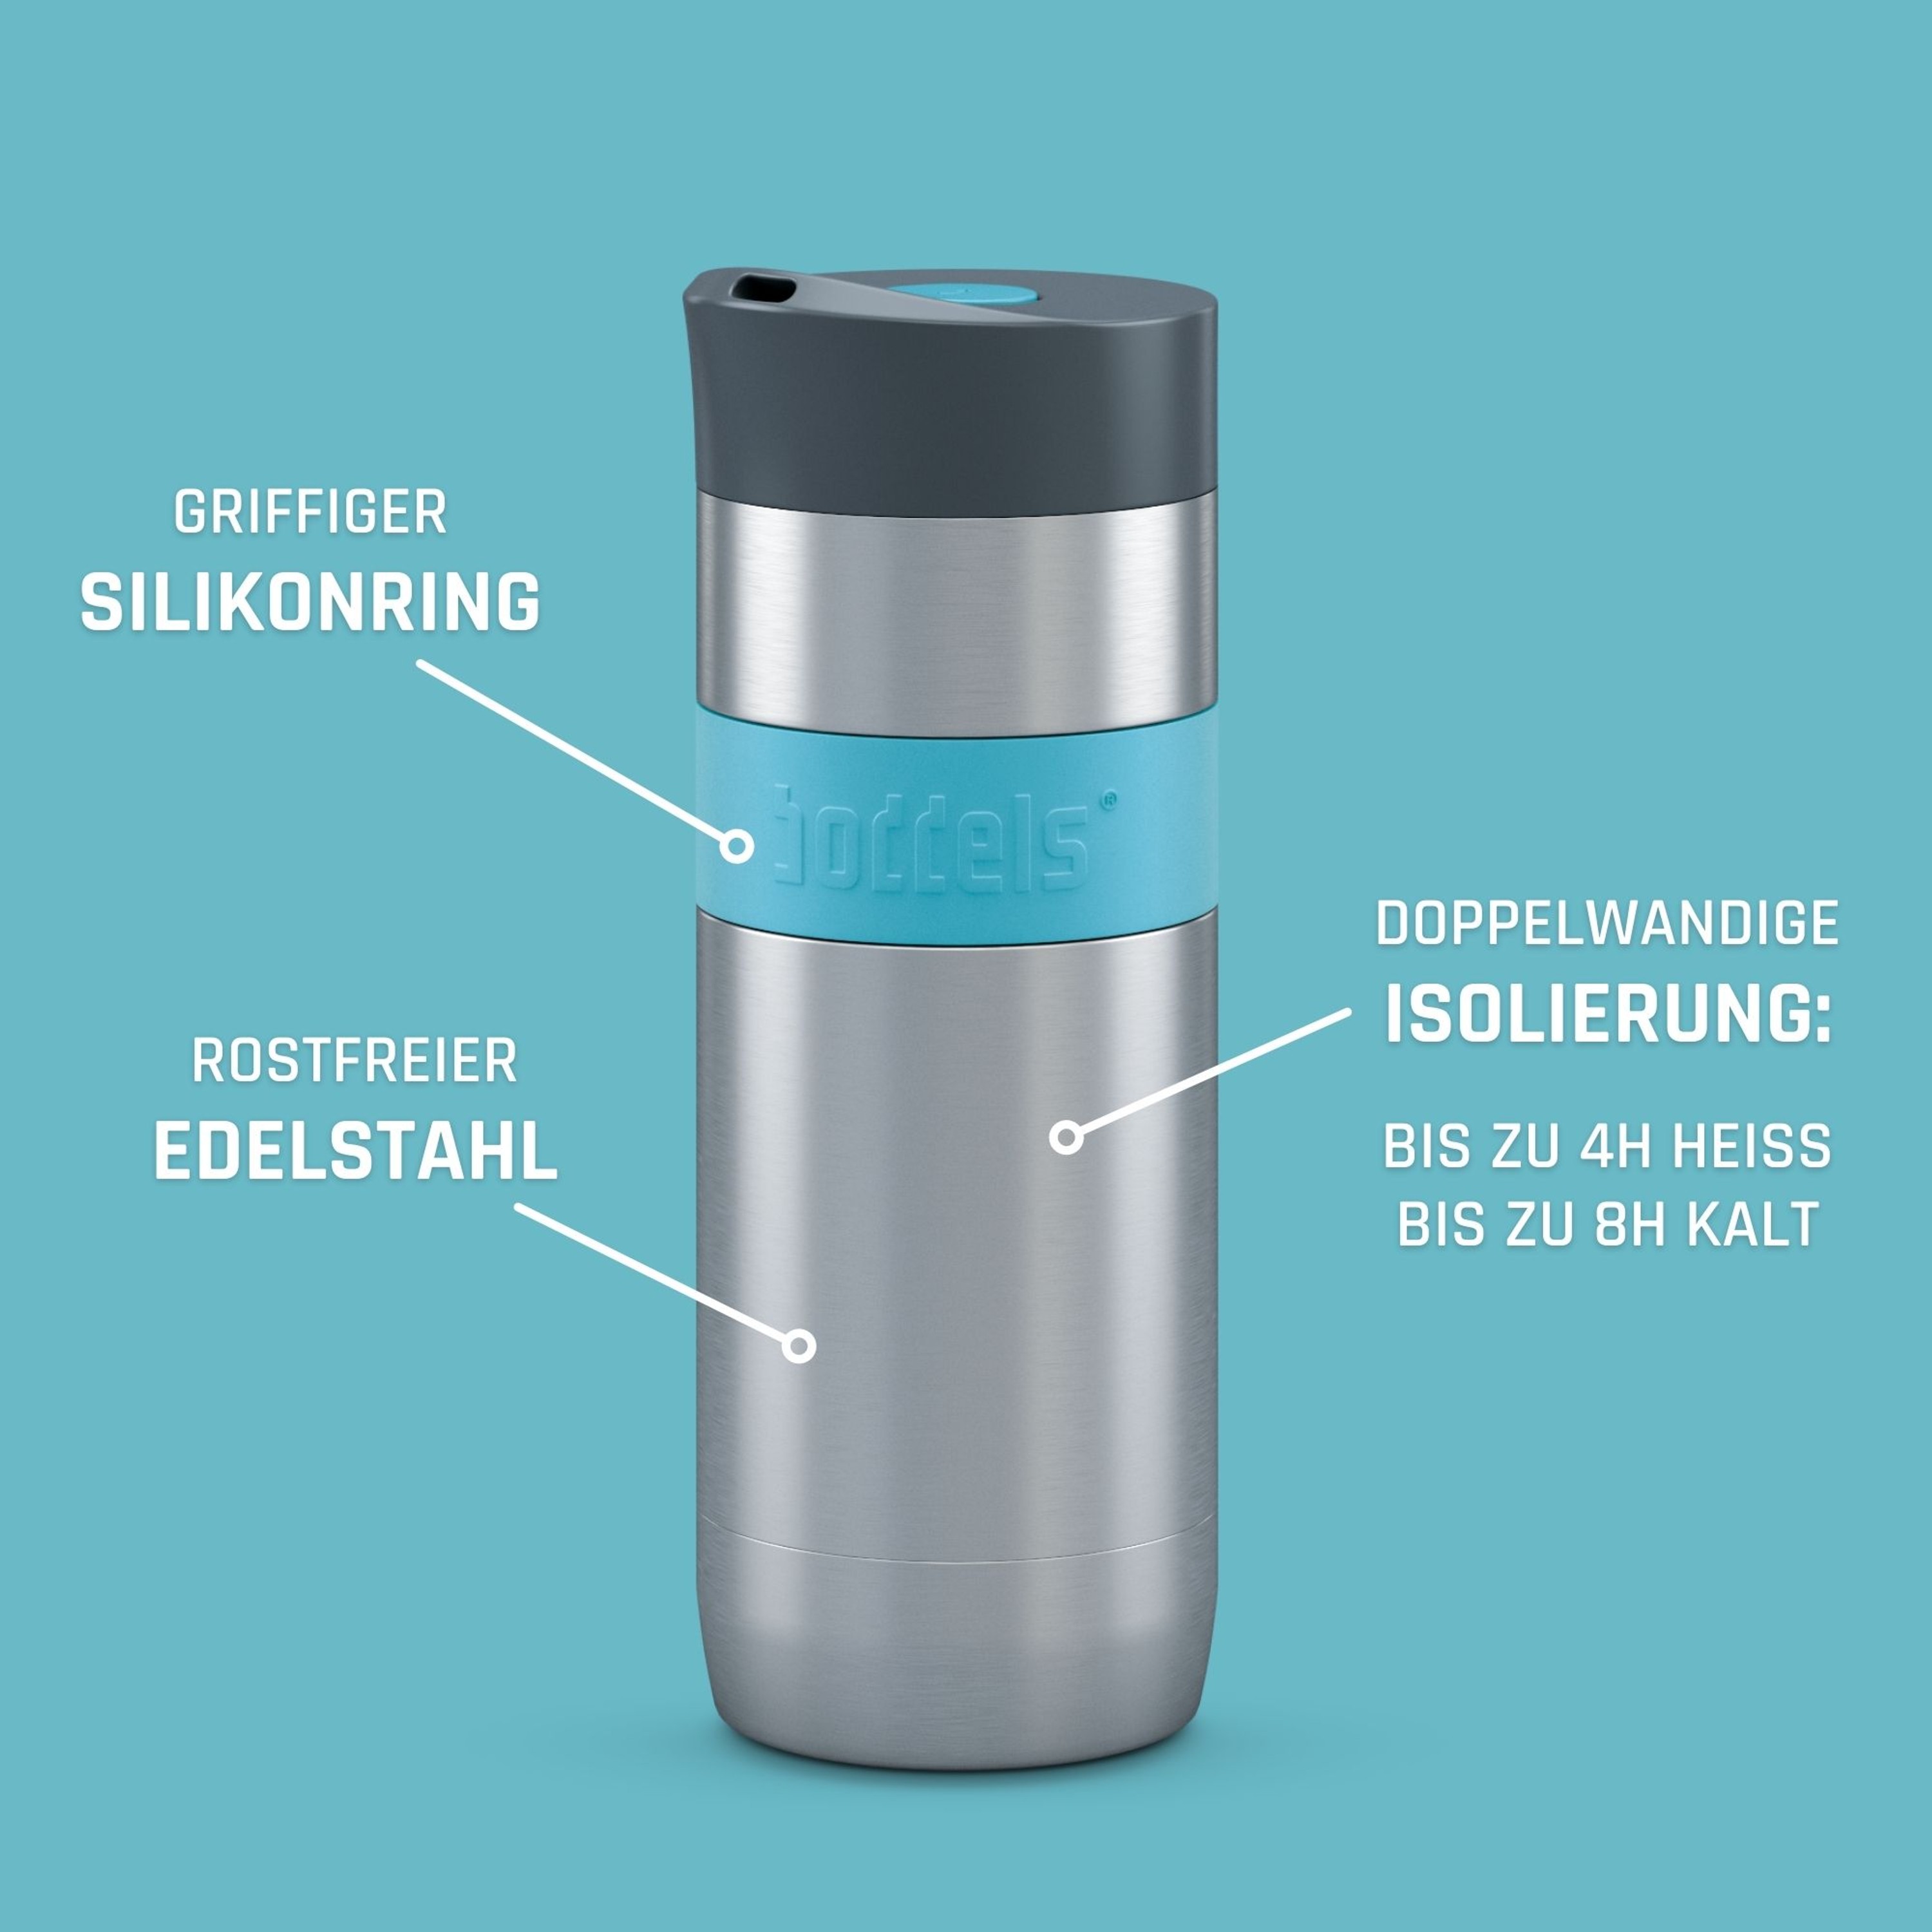 Thermobecher KOFFJE für warme Getränke | boddels - Made for life